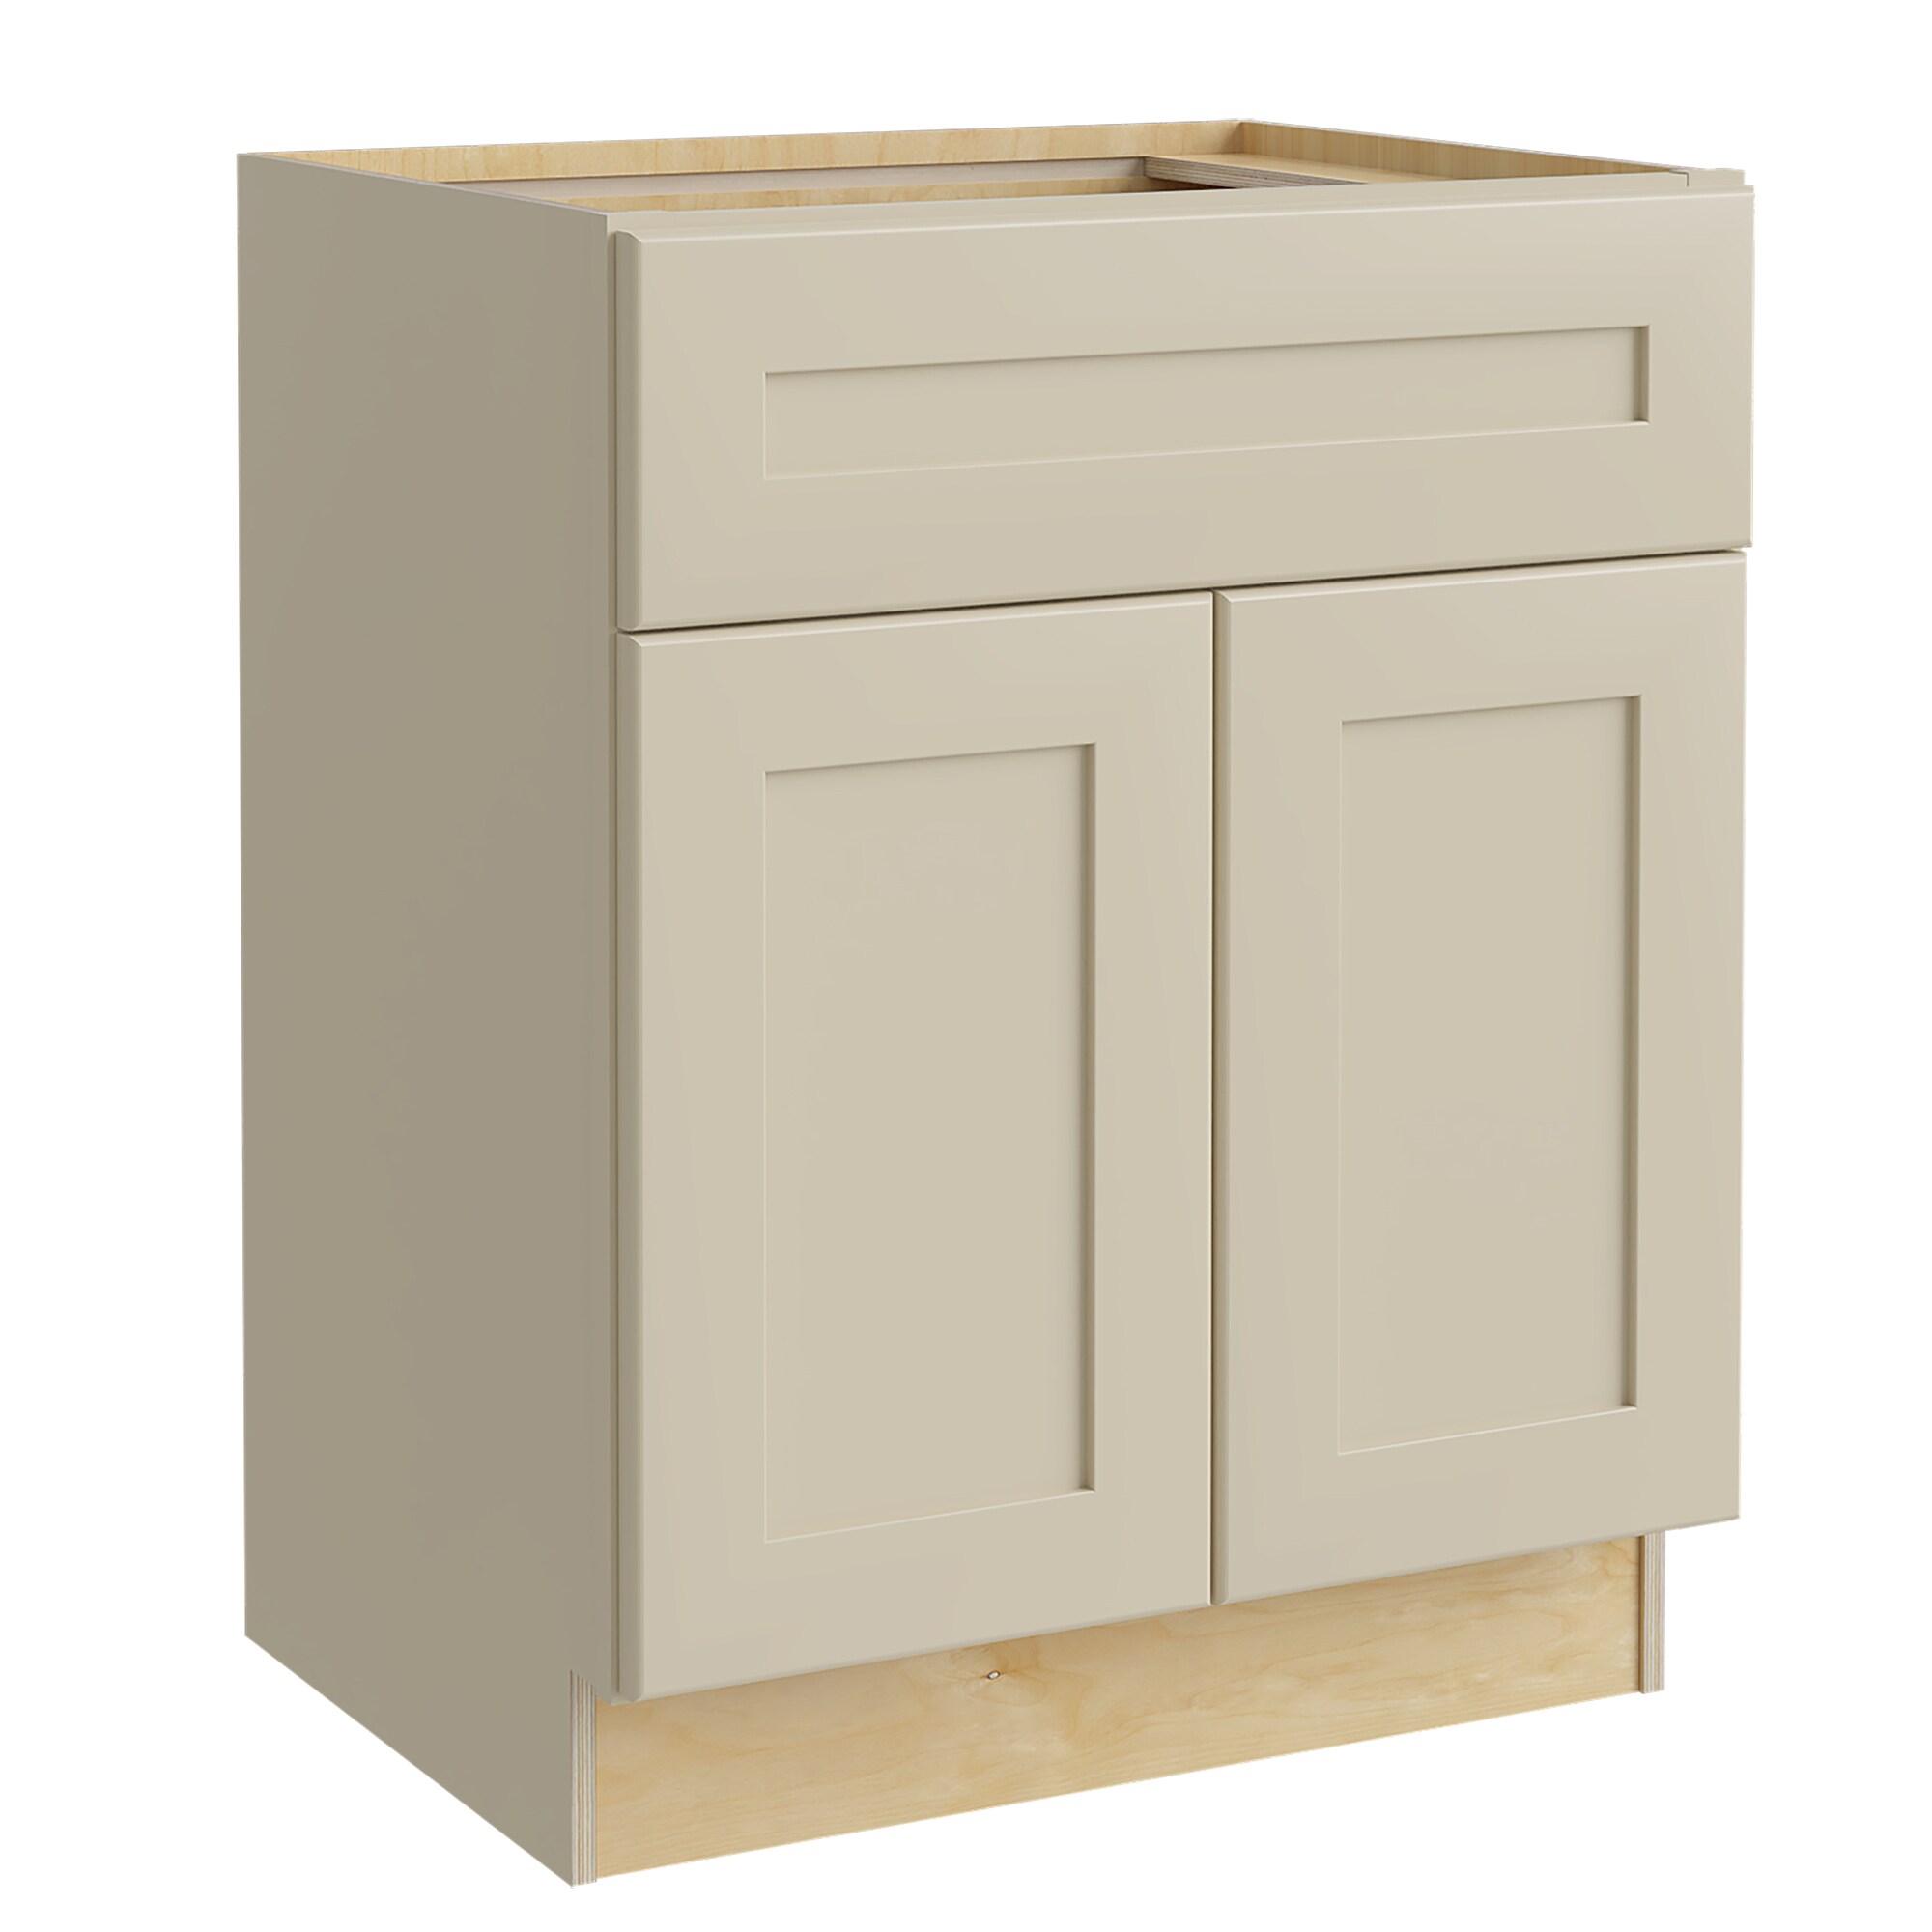 Luxxe Cabinetry 24-in W x 34.5-in H x 21-in D Norfolk Blended Cream Painted Sink Base Fully Assembled Semi-custom Cabinet in Off-White | VSB2421-NBC